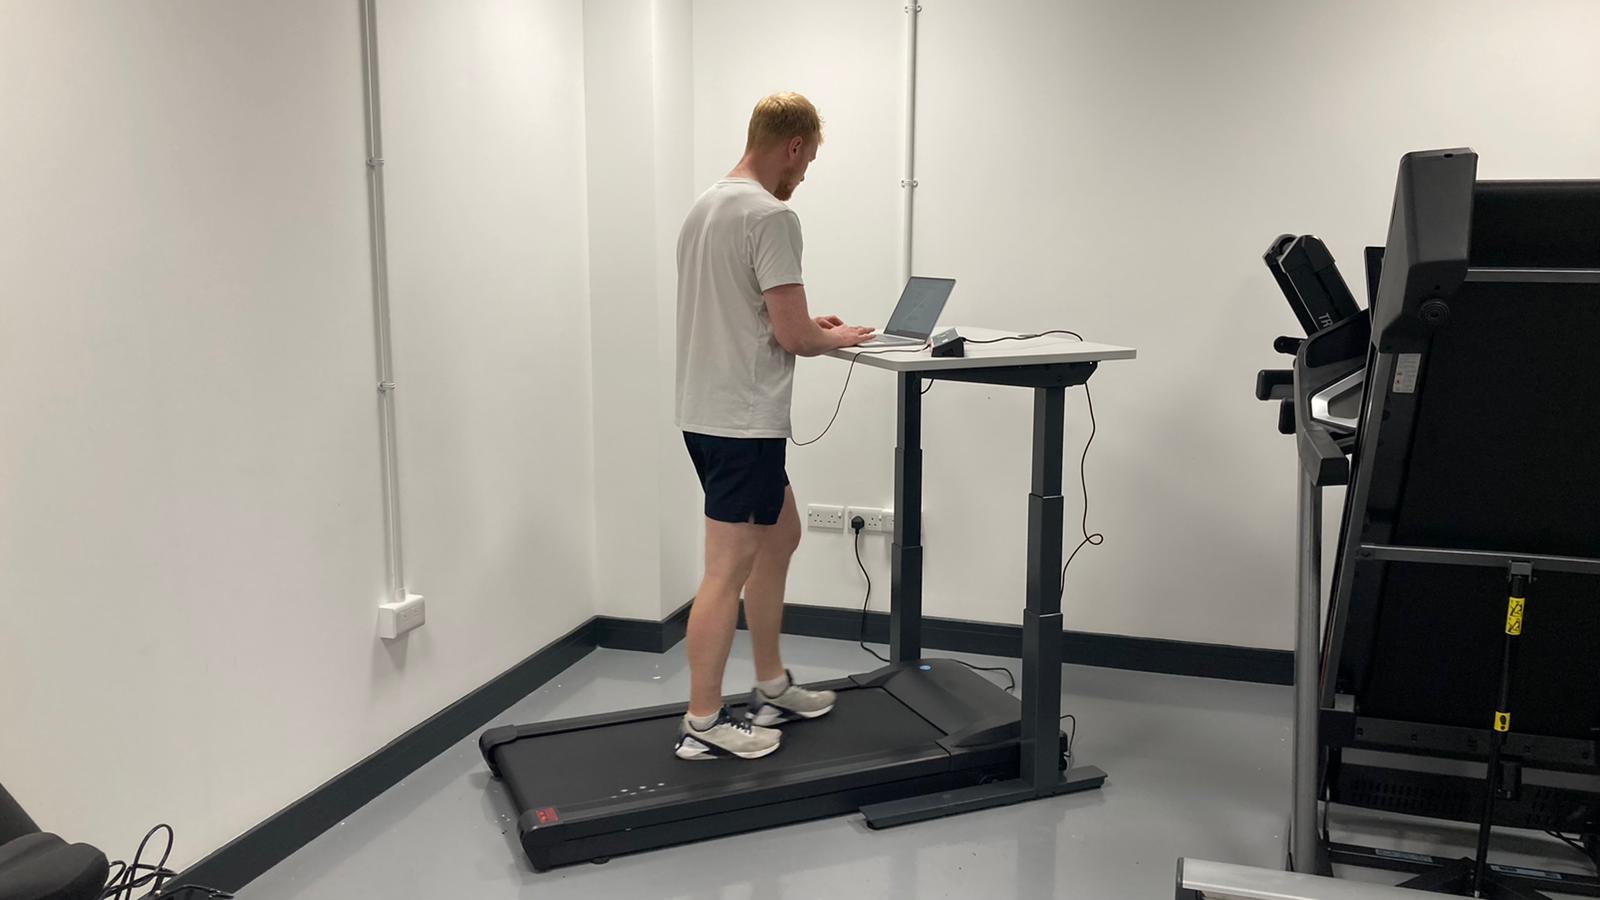 Live Science fitness writer, Harry Bullmore, tests the Lifespan TR1200-DT3-BT in a purpose-built testing centre